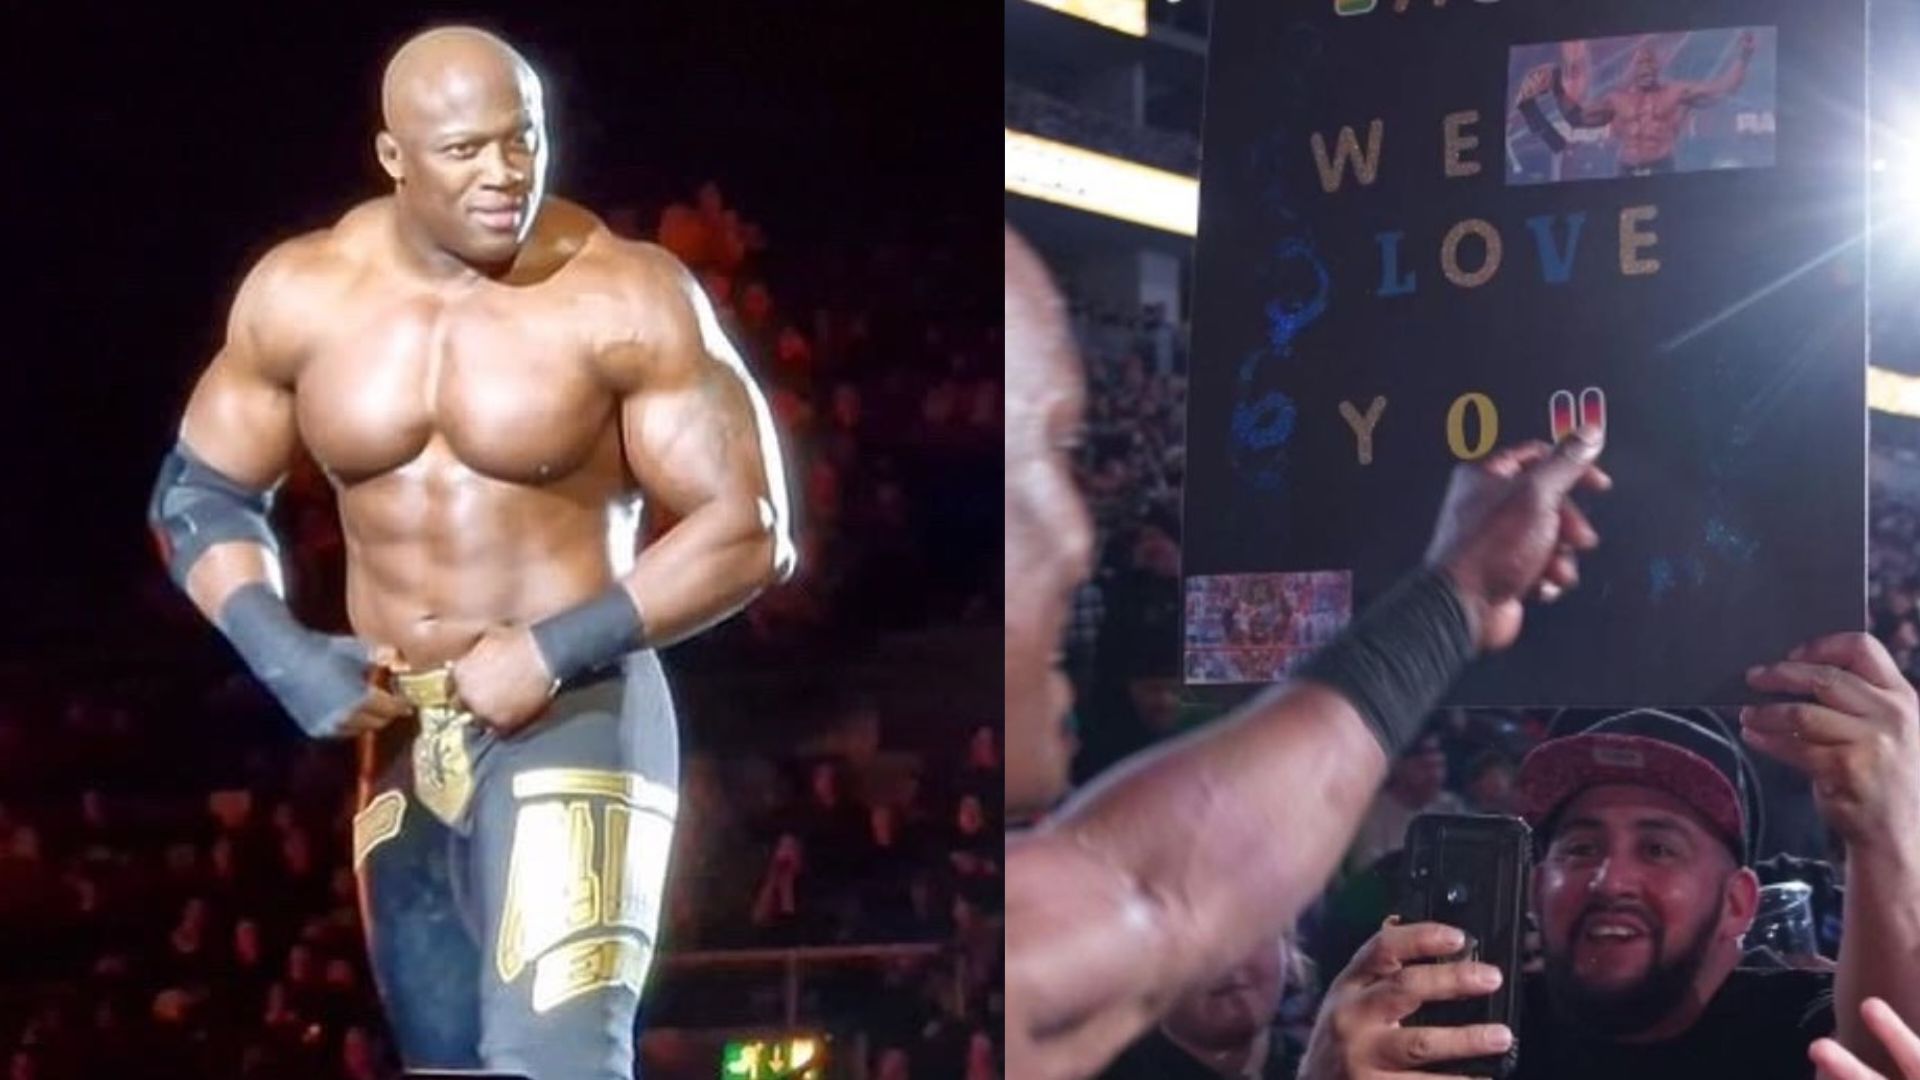 Bobby Lashley is currently drafted on SmackDown (Photo credits: Lashley